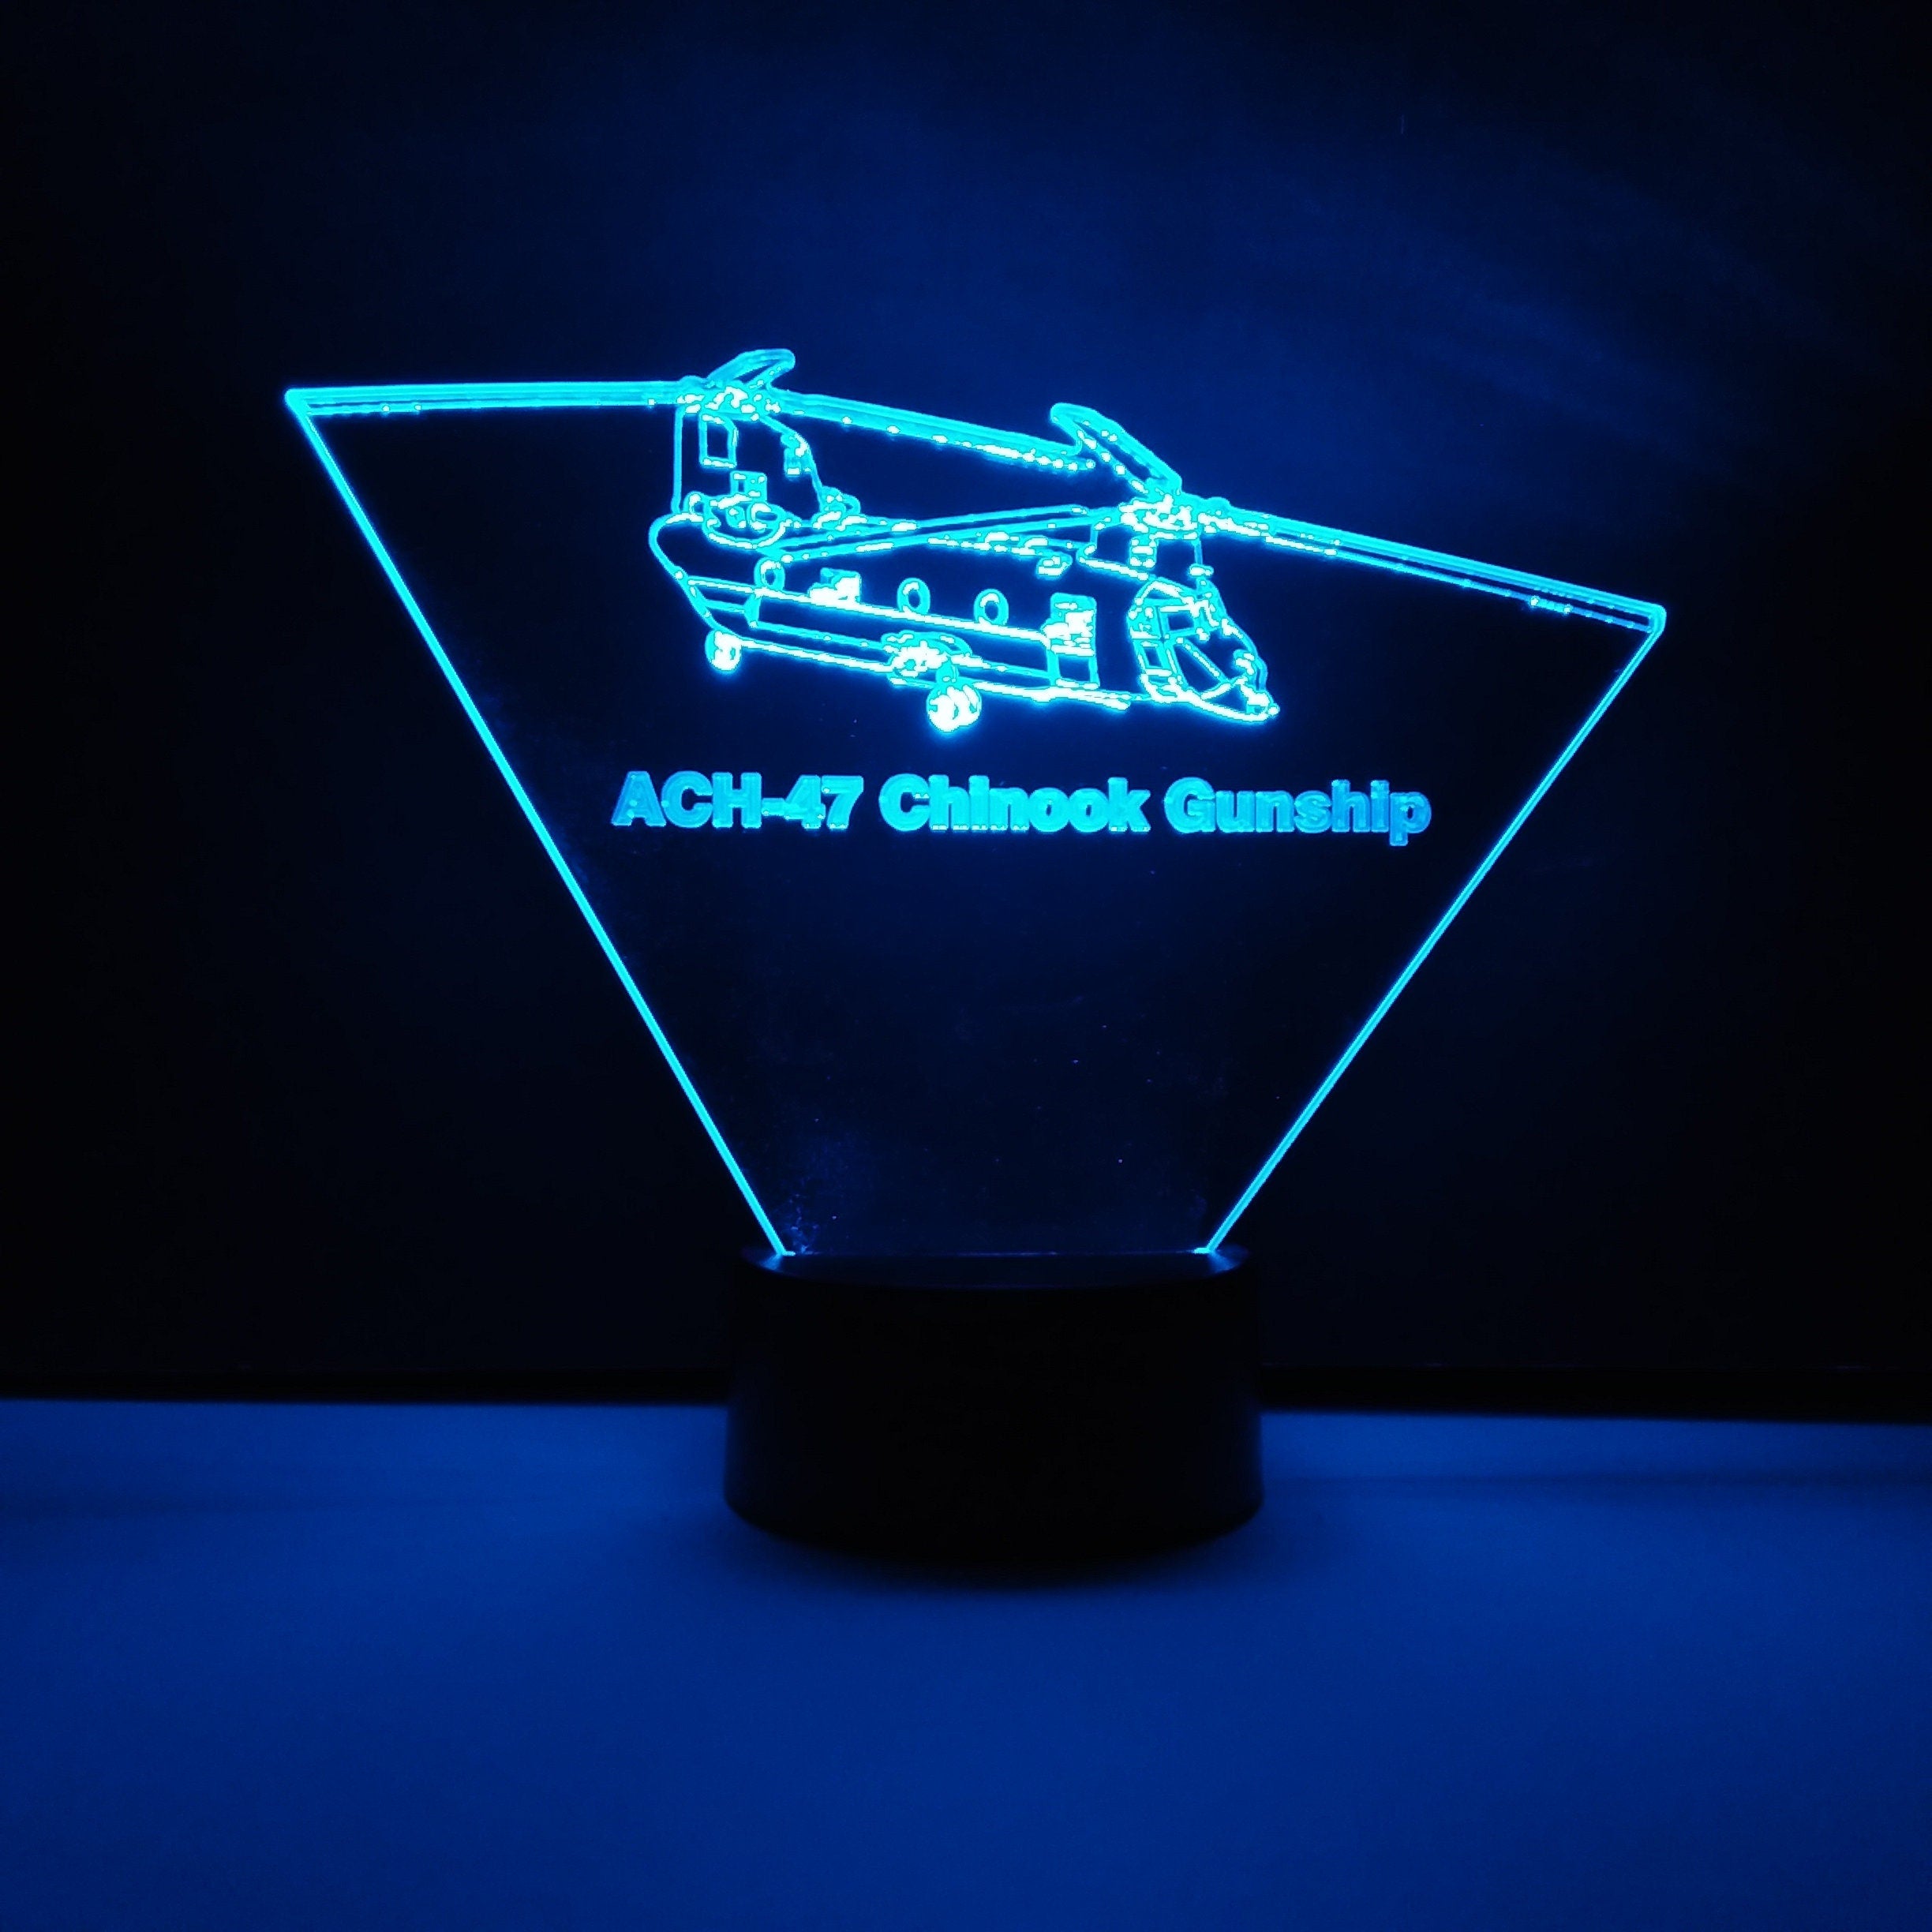 Awesome "ACH-47 Chinook Gunship" 3D LED Lamp (1211)